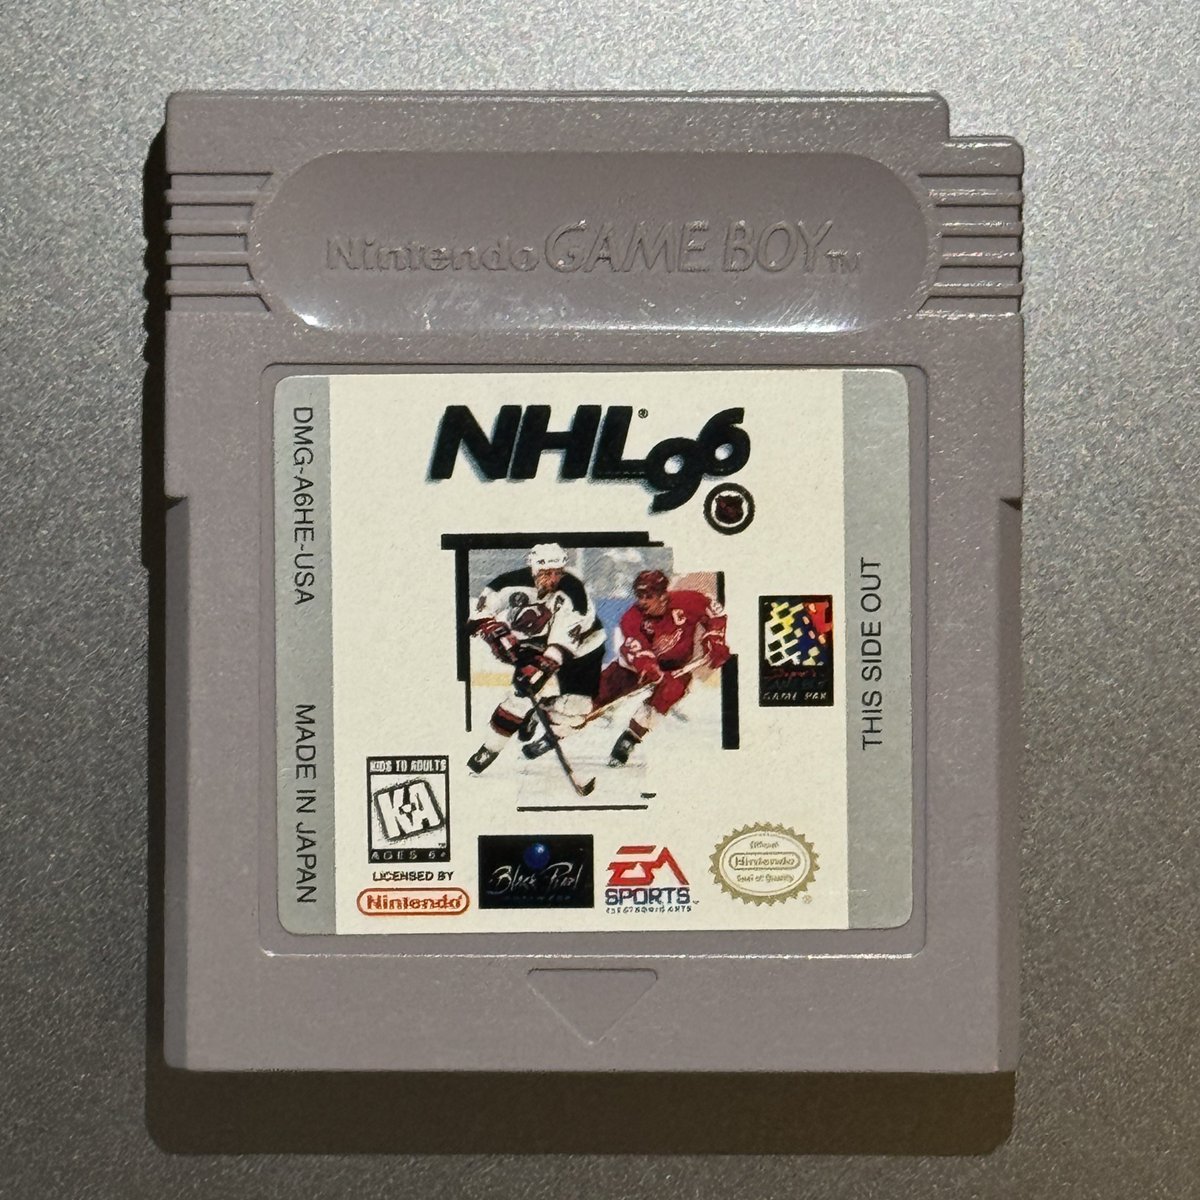 Felt like a good night to dust this off. 🏒🎮